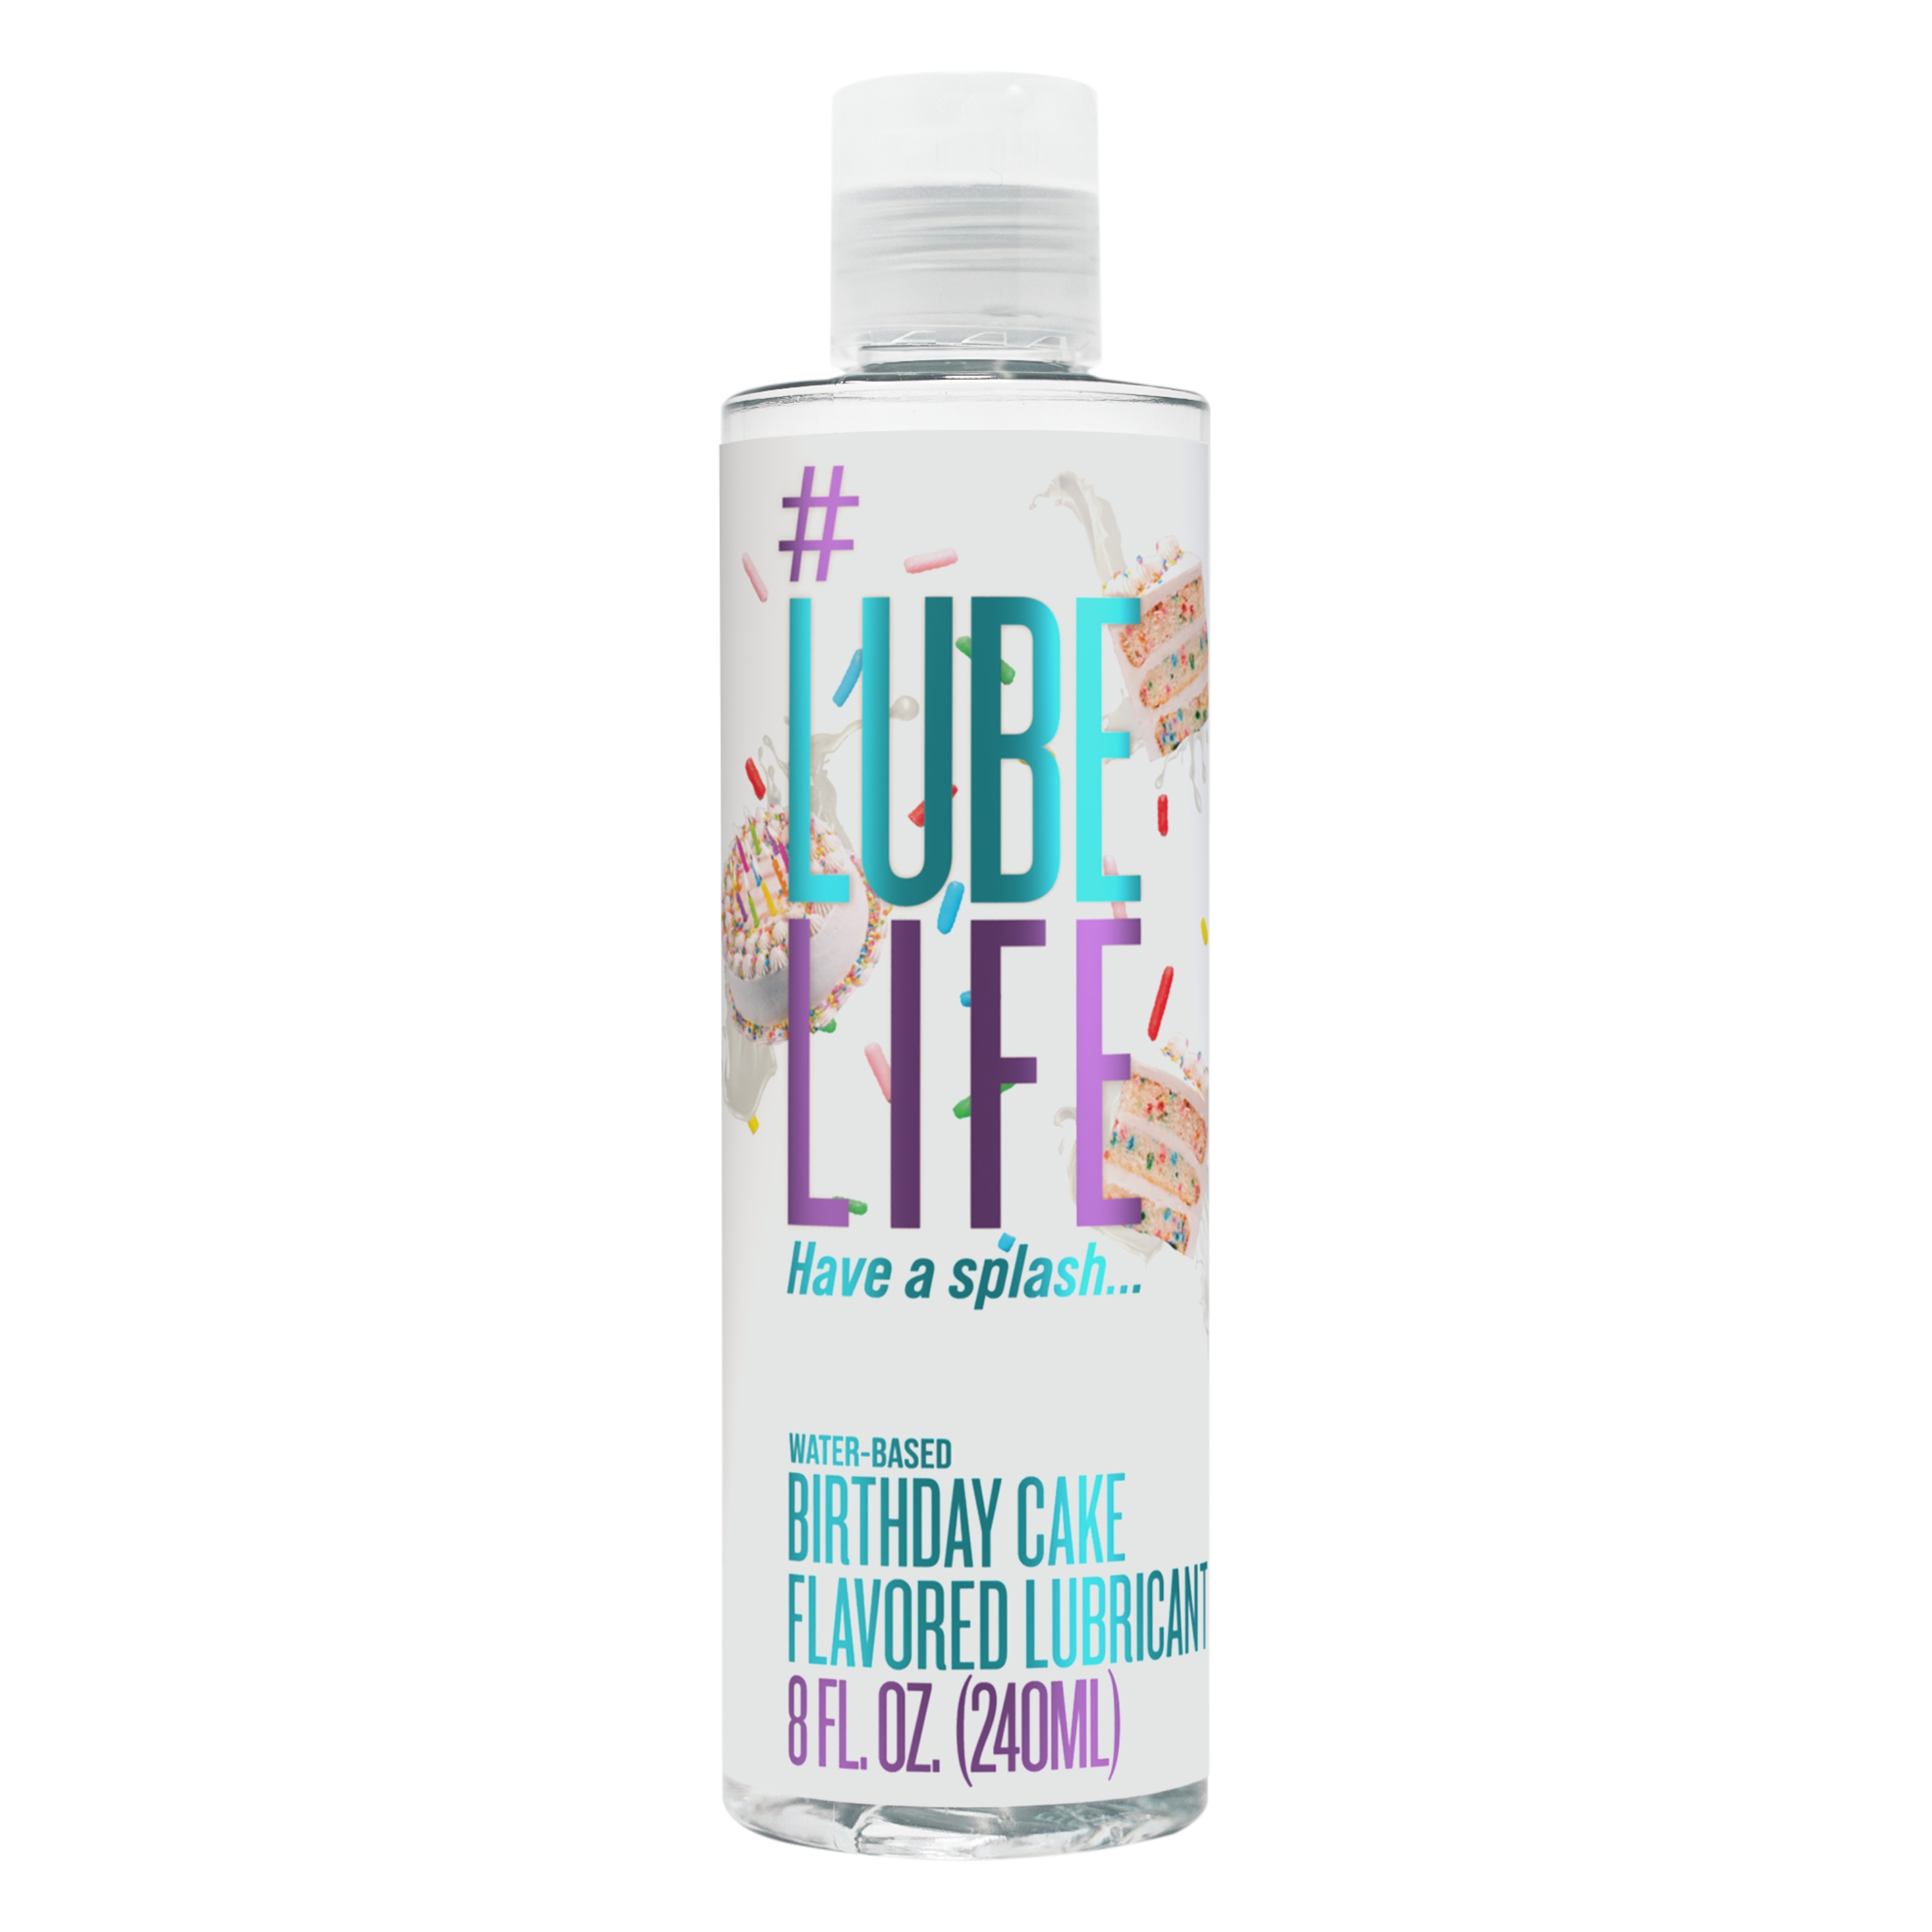 Lube Life Water-Based Birthday Cake Flavored Lubricant, 8 fl oz - image 1 of 5